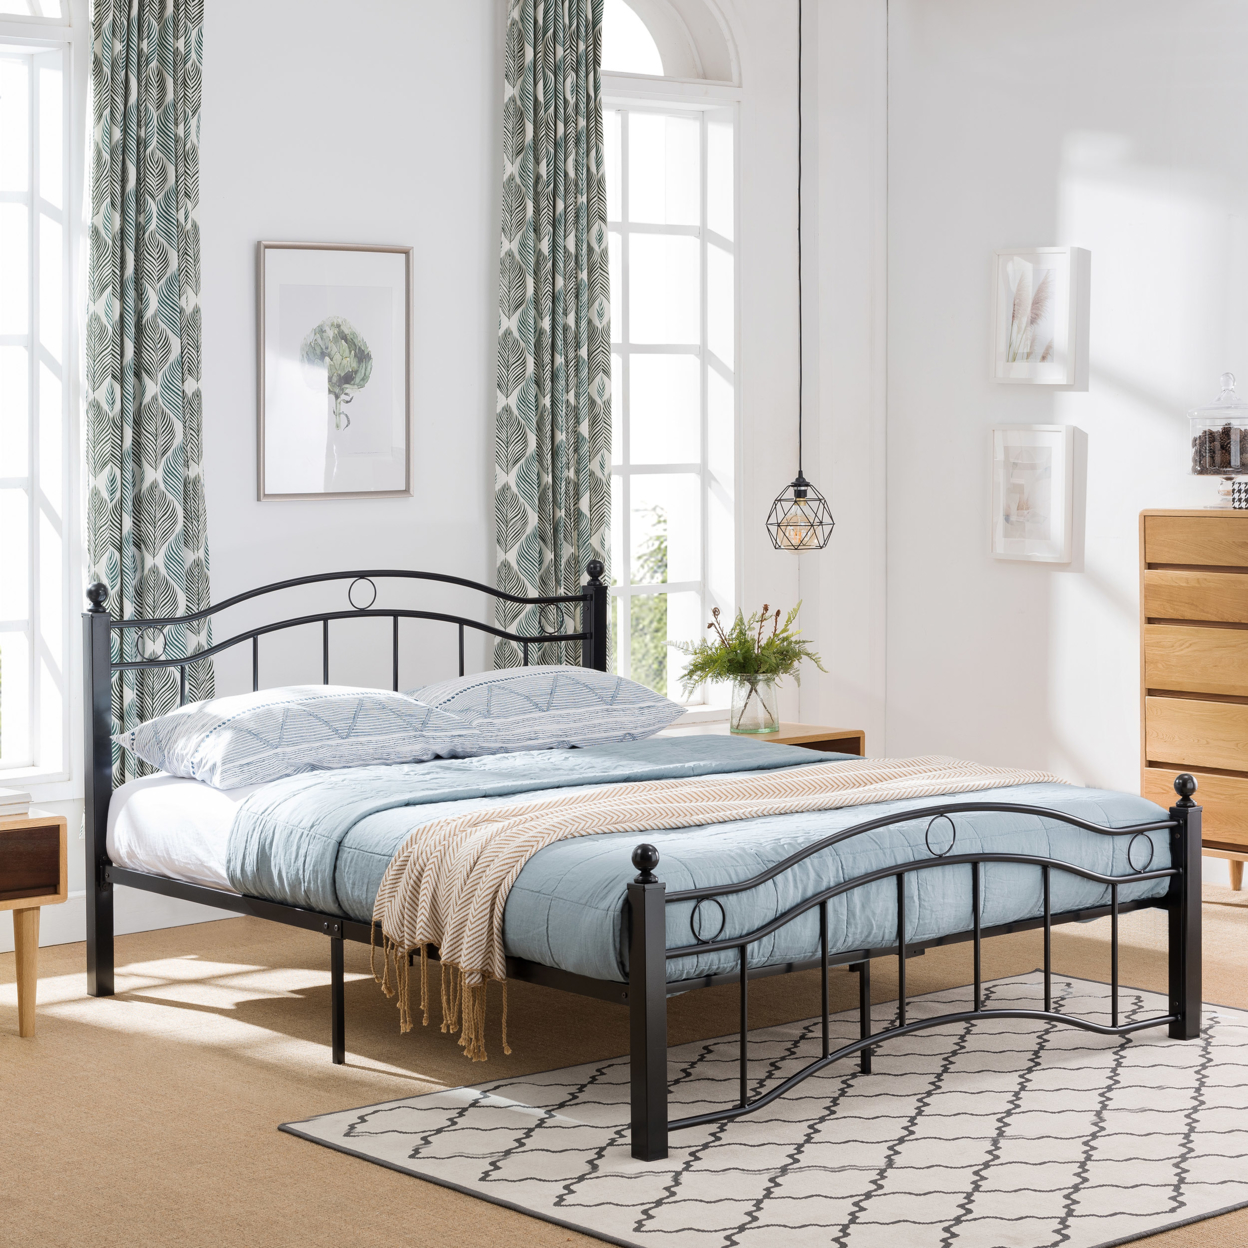 Cole Contemporary Iron Queen Bed Frame - Hammered Copper